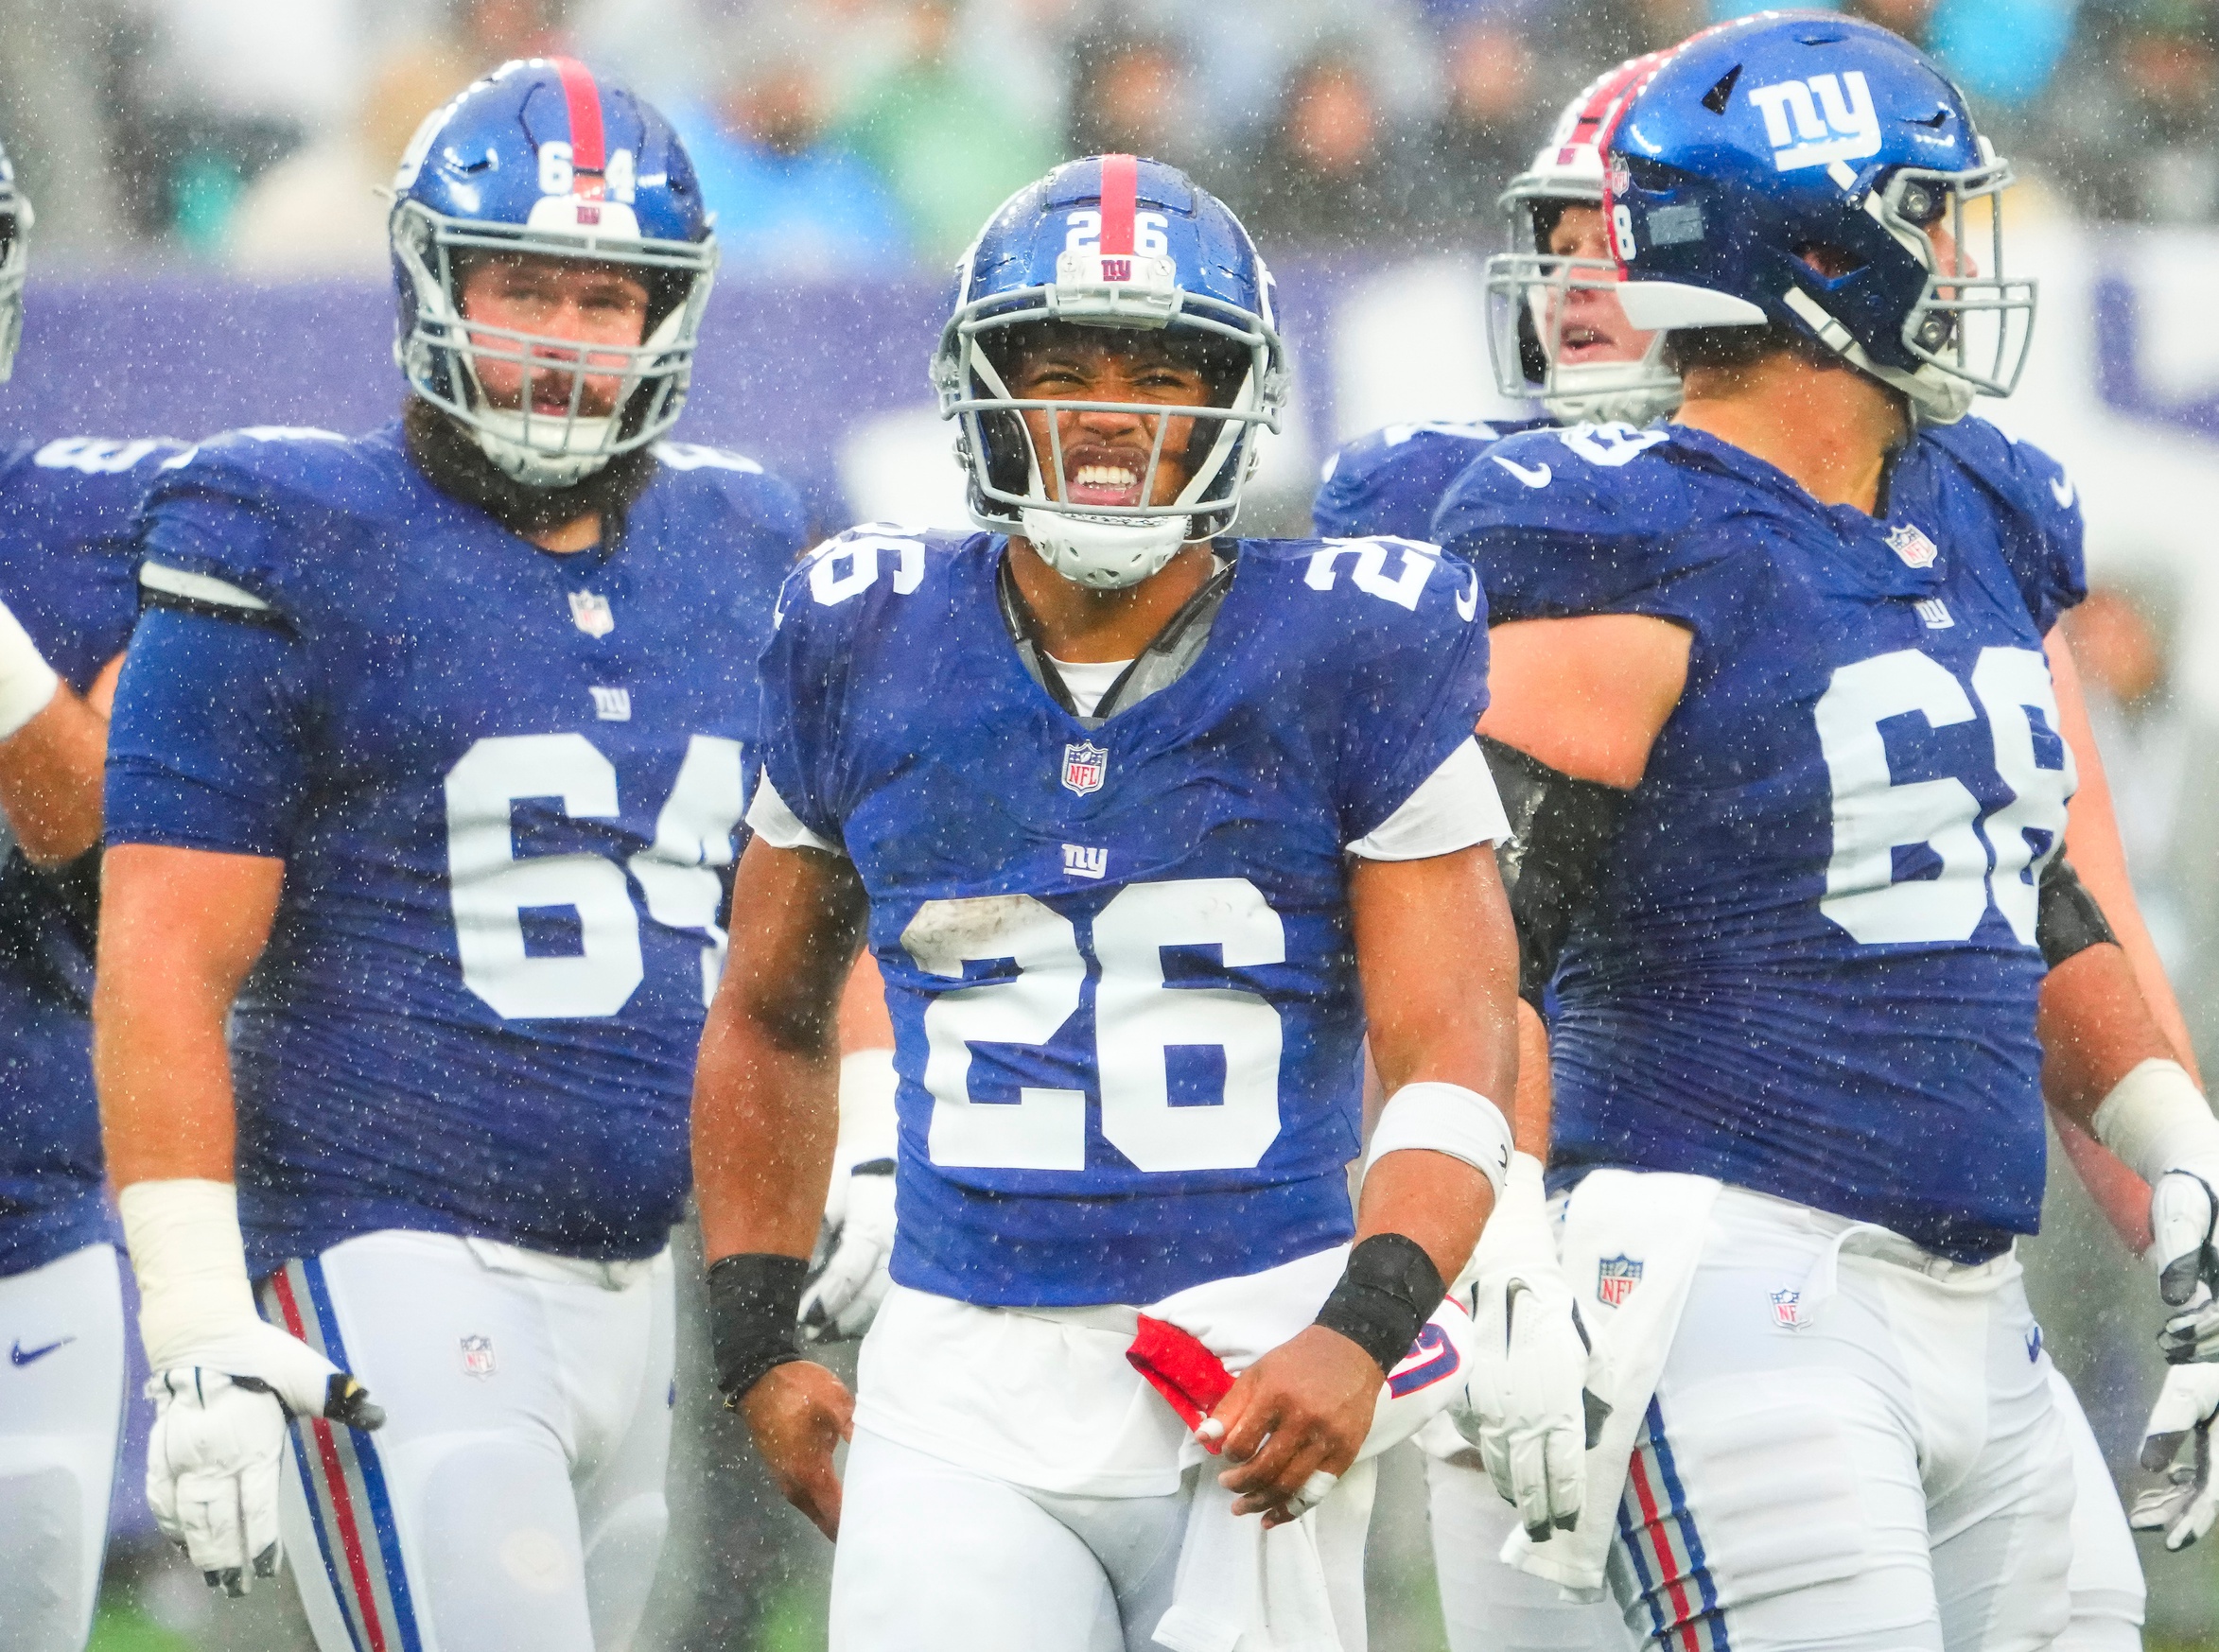 New York Giants running back Saquon Barkley (26) reacts after being stopped short of a first down by the New York Jets in the second half at MetLife Stadium.